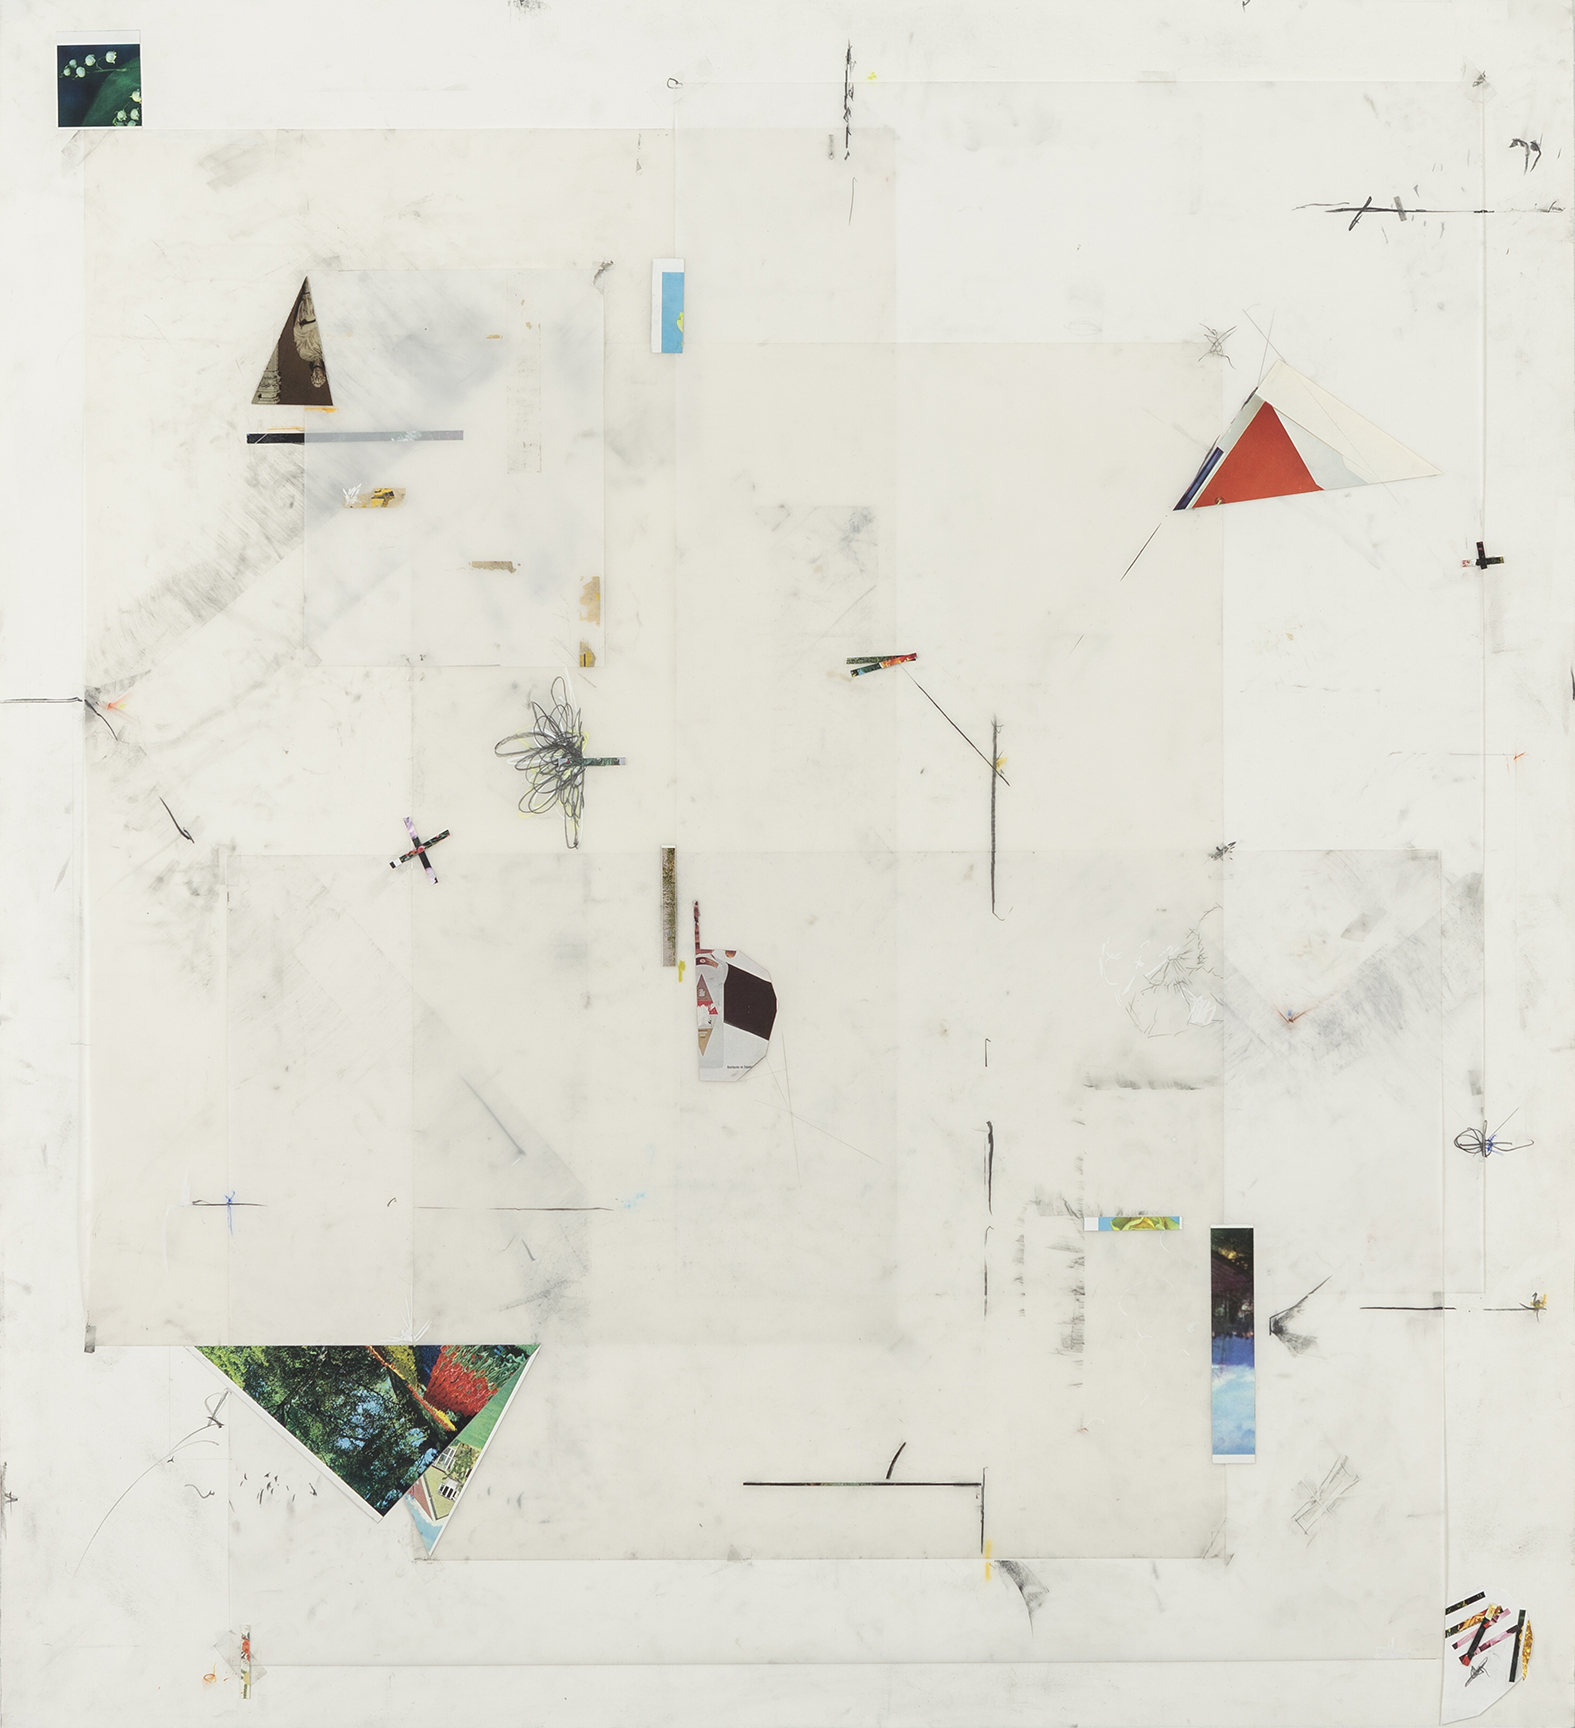 Javier_Romero-14_Garden_Floor_Plan_4_2013_Graphite_colored_pencil_pastels_and_collage_on_paper_